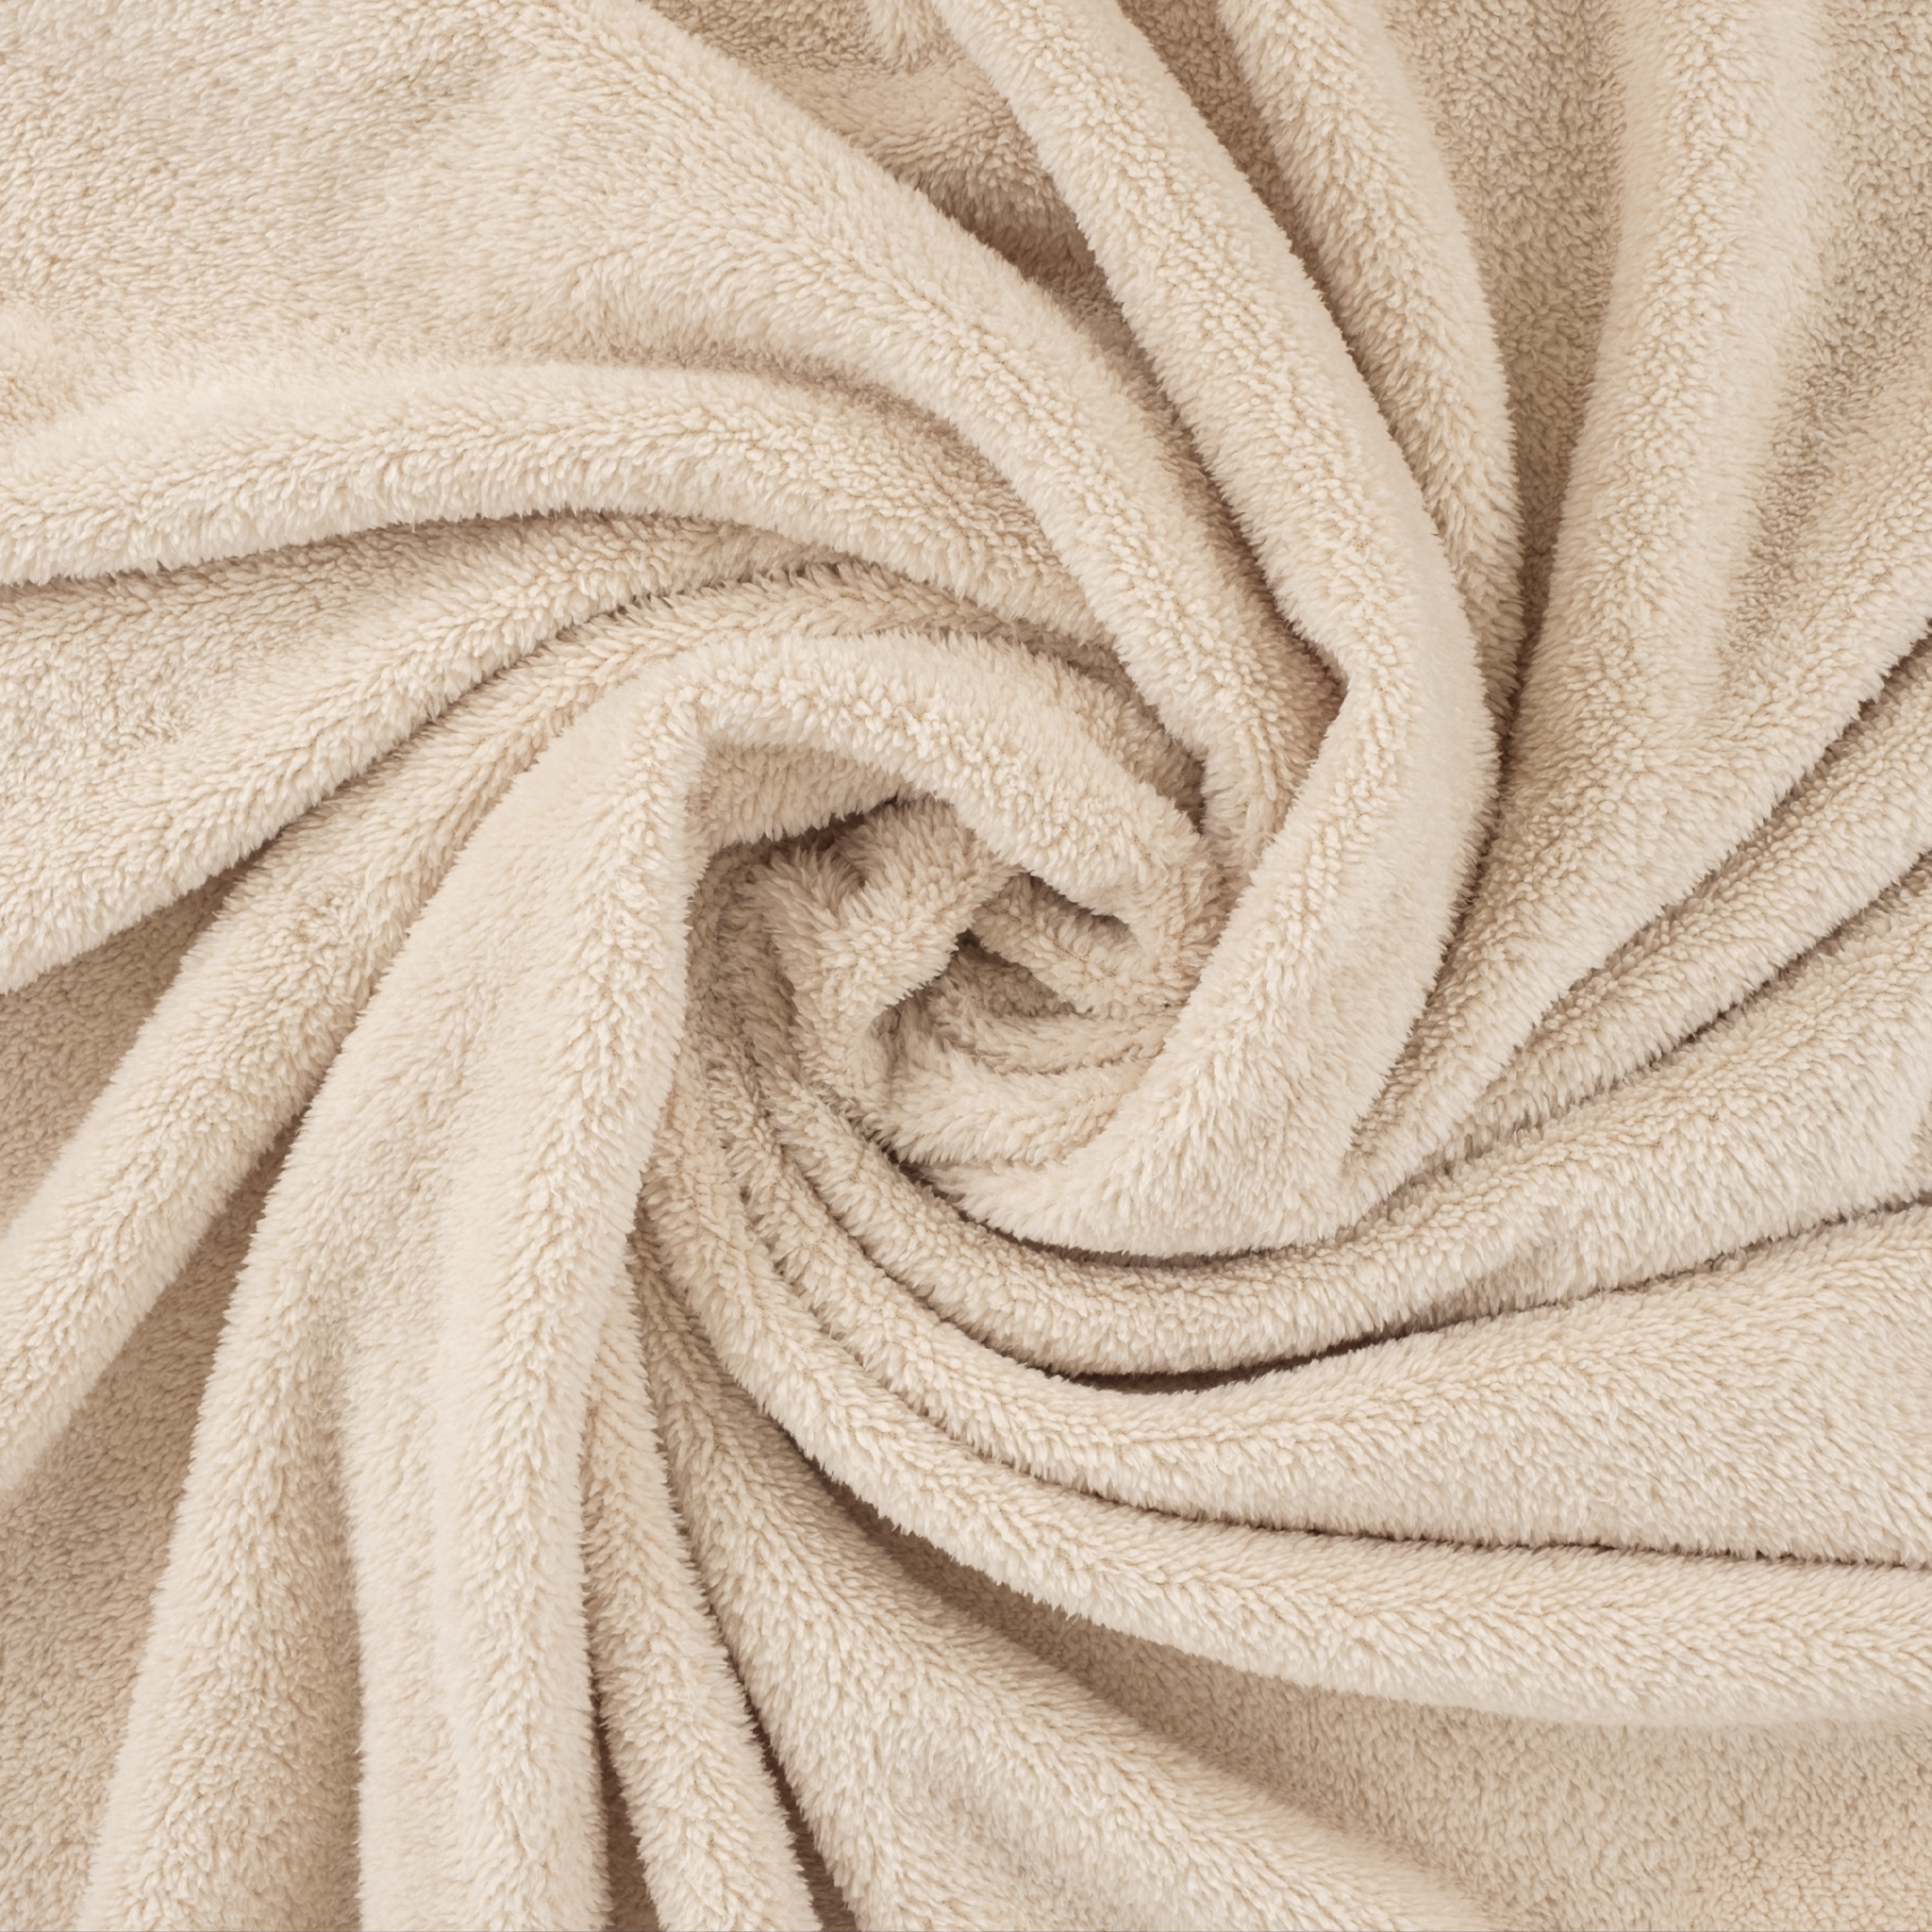 American Soft Linen - Bedding Fleece Blanket - Wholesale - 9 Set Case Pack - Queen Size 85x90 inches - Sand-Taupe - 5